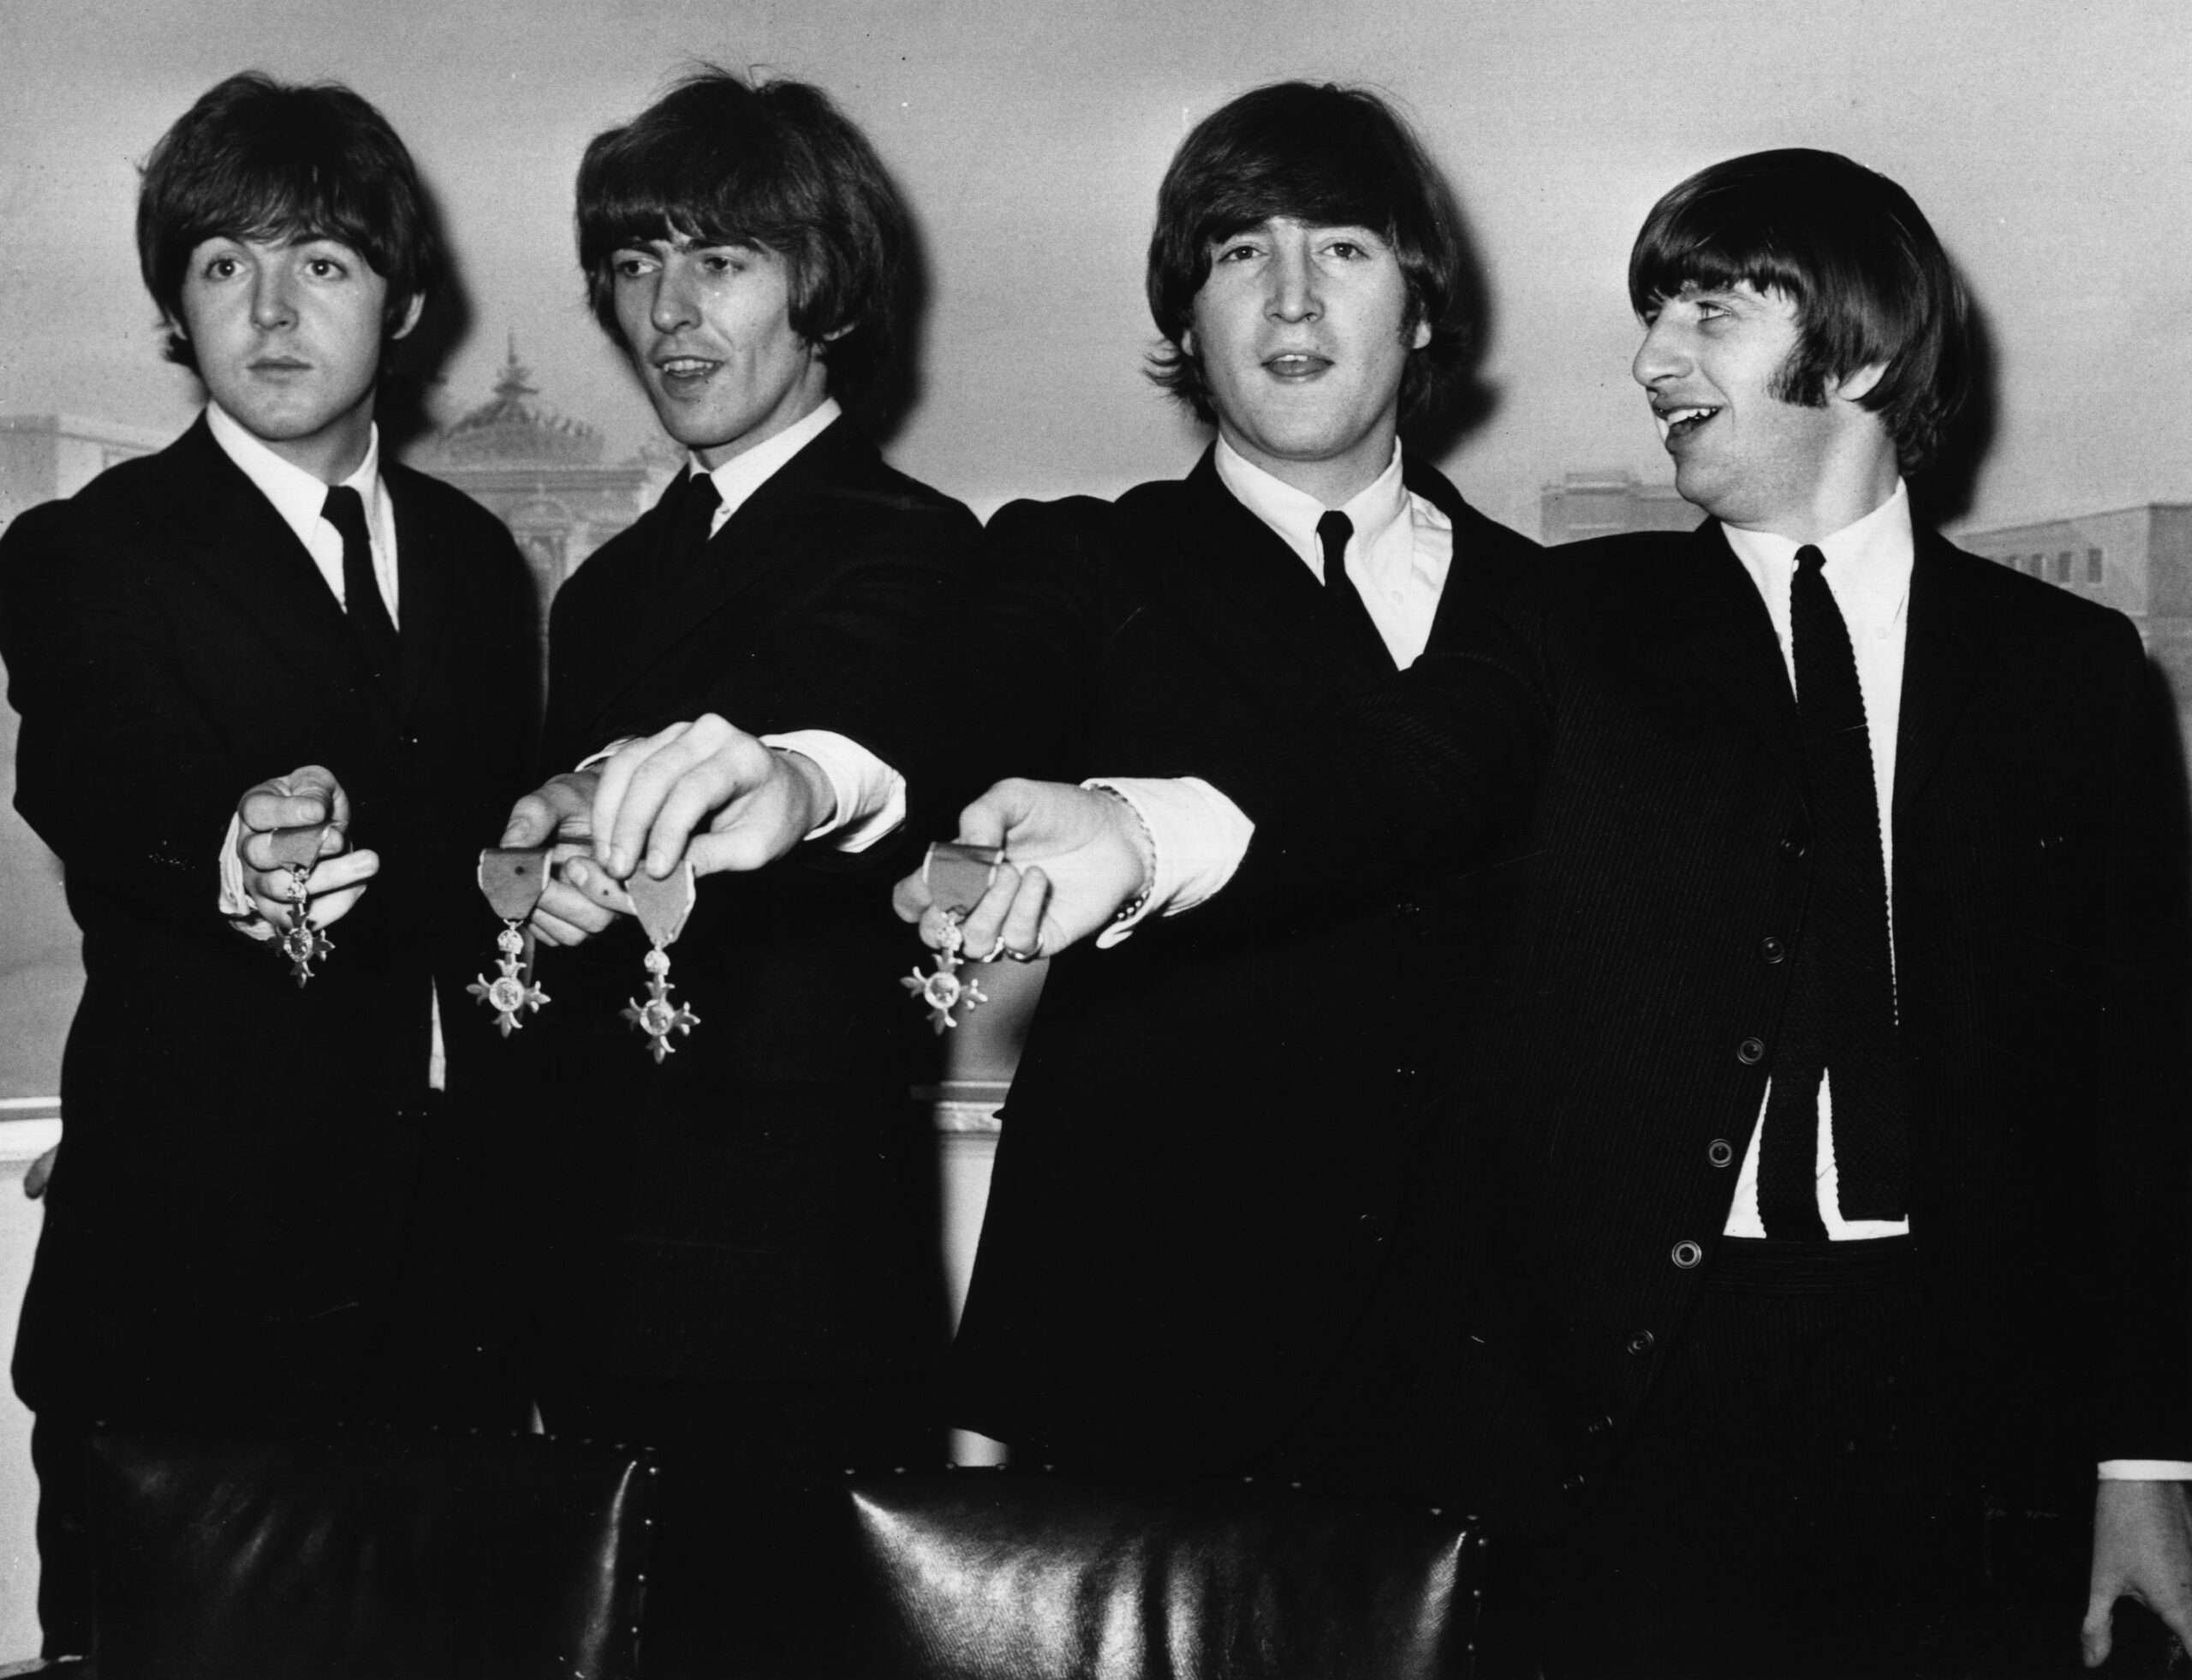 the beatles mbe awards